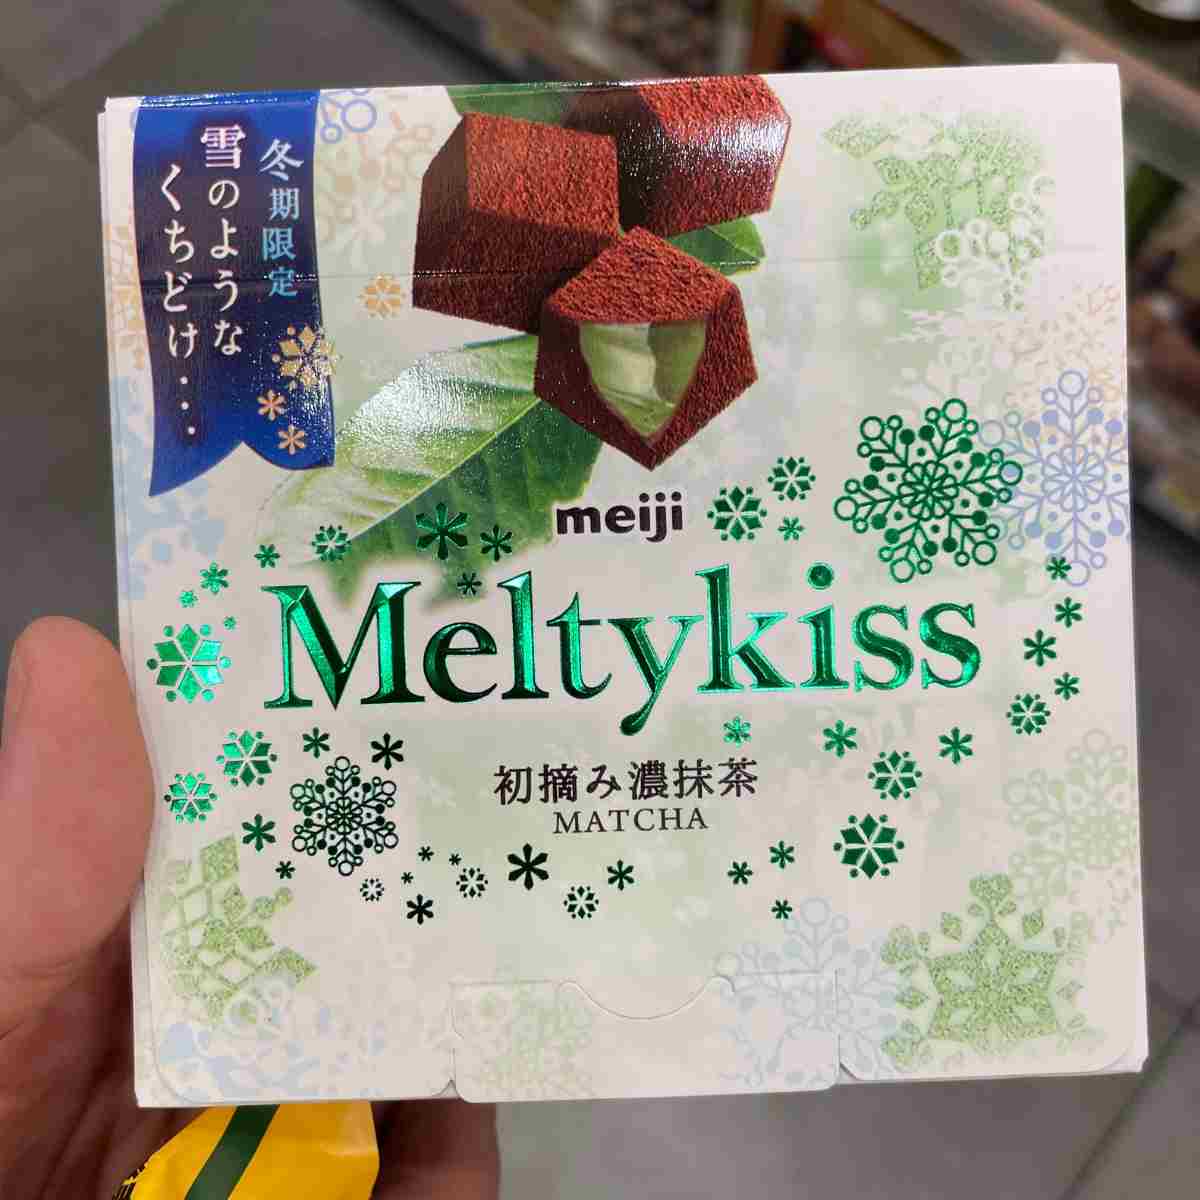 Japanese melty kiss matcha flavour